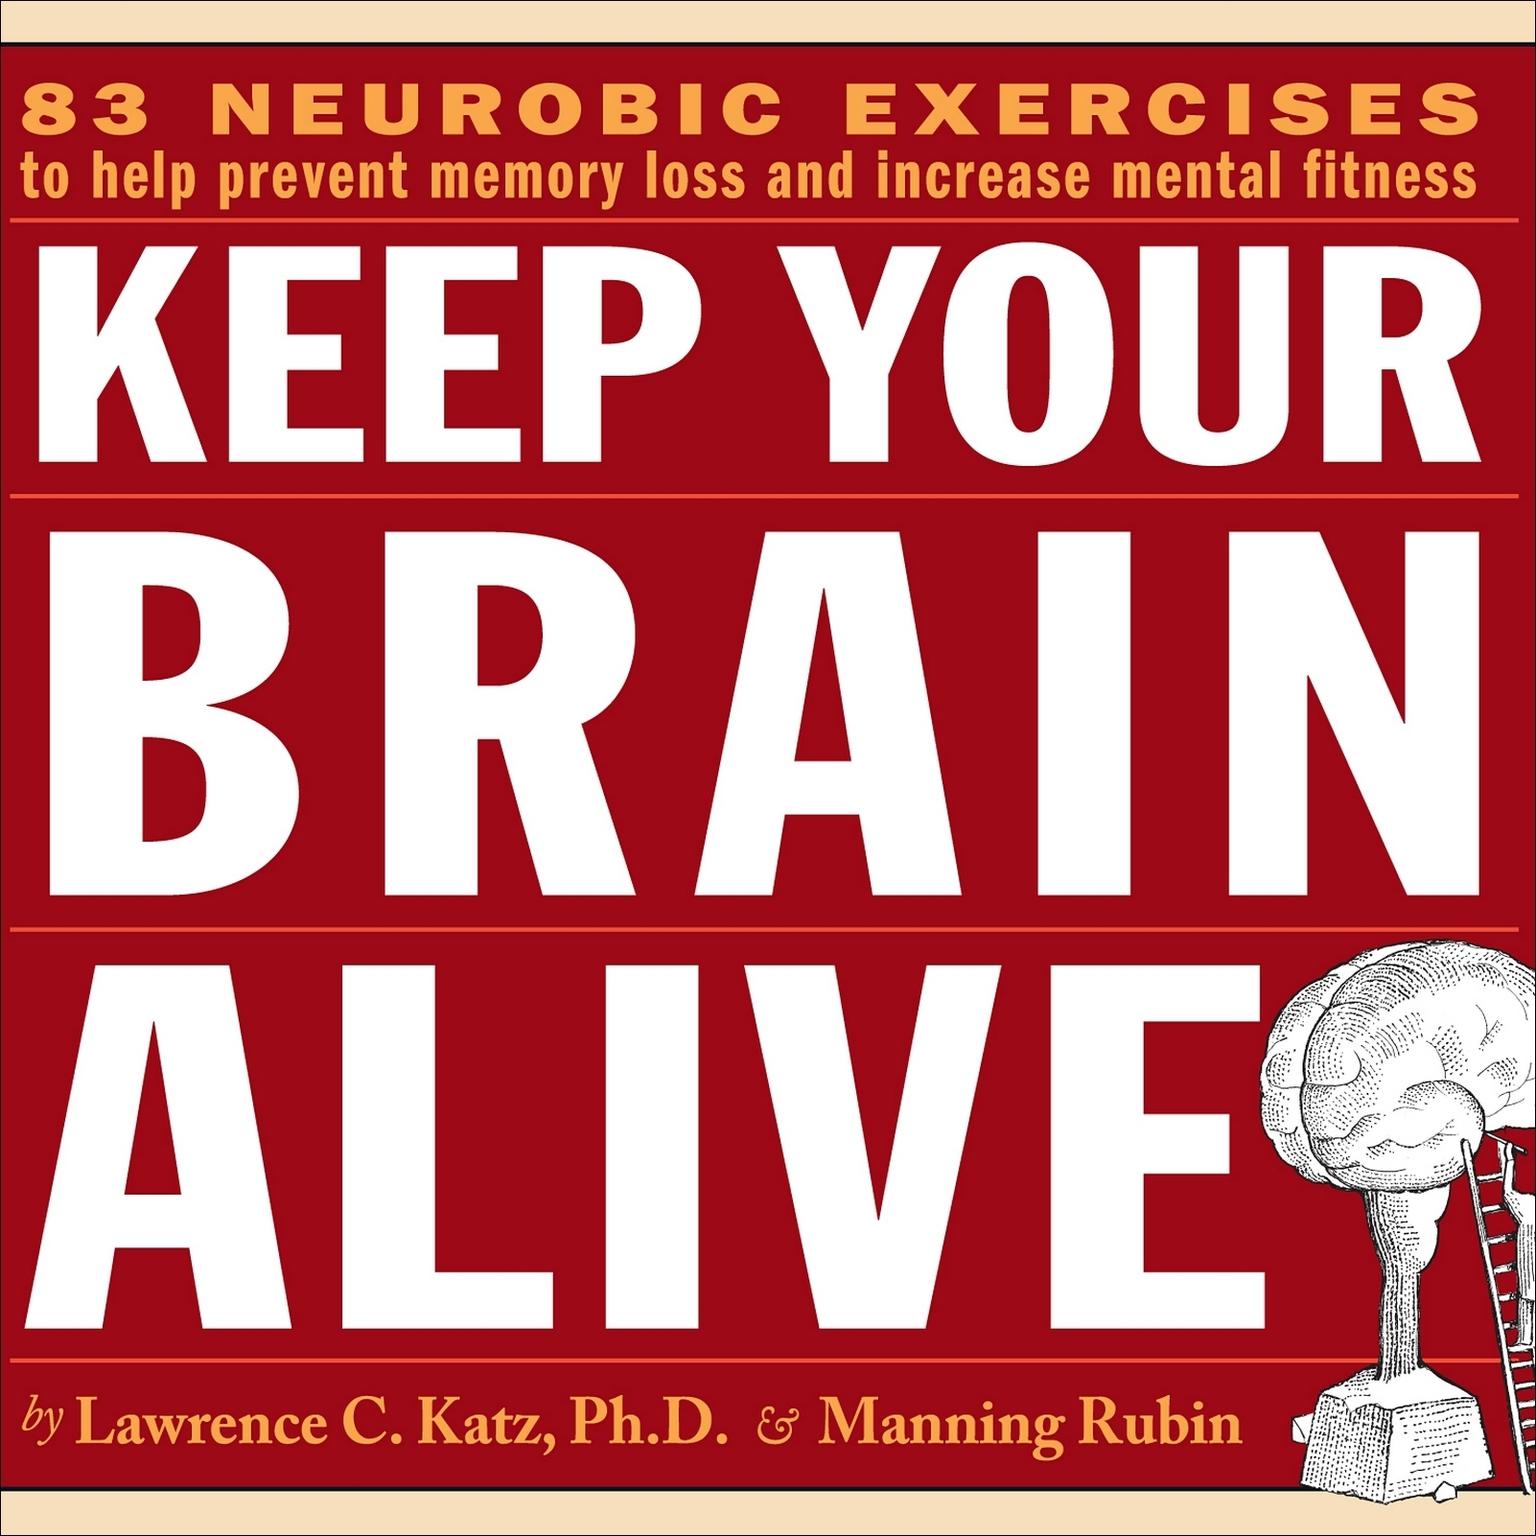 Keep Your Brain Alive (Abridged): Neurobic Exercises to Help Prevent Memory Loss and Increase Mental Fitness Audiobook, by Lawrence C. Katz